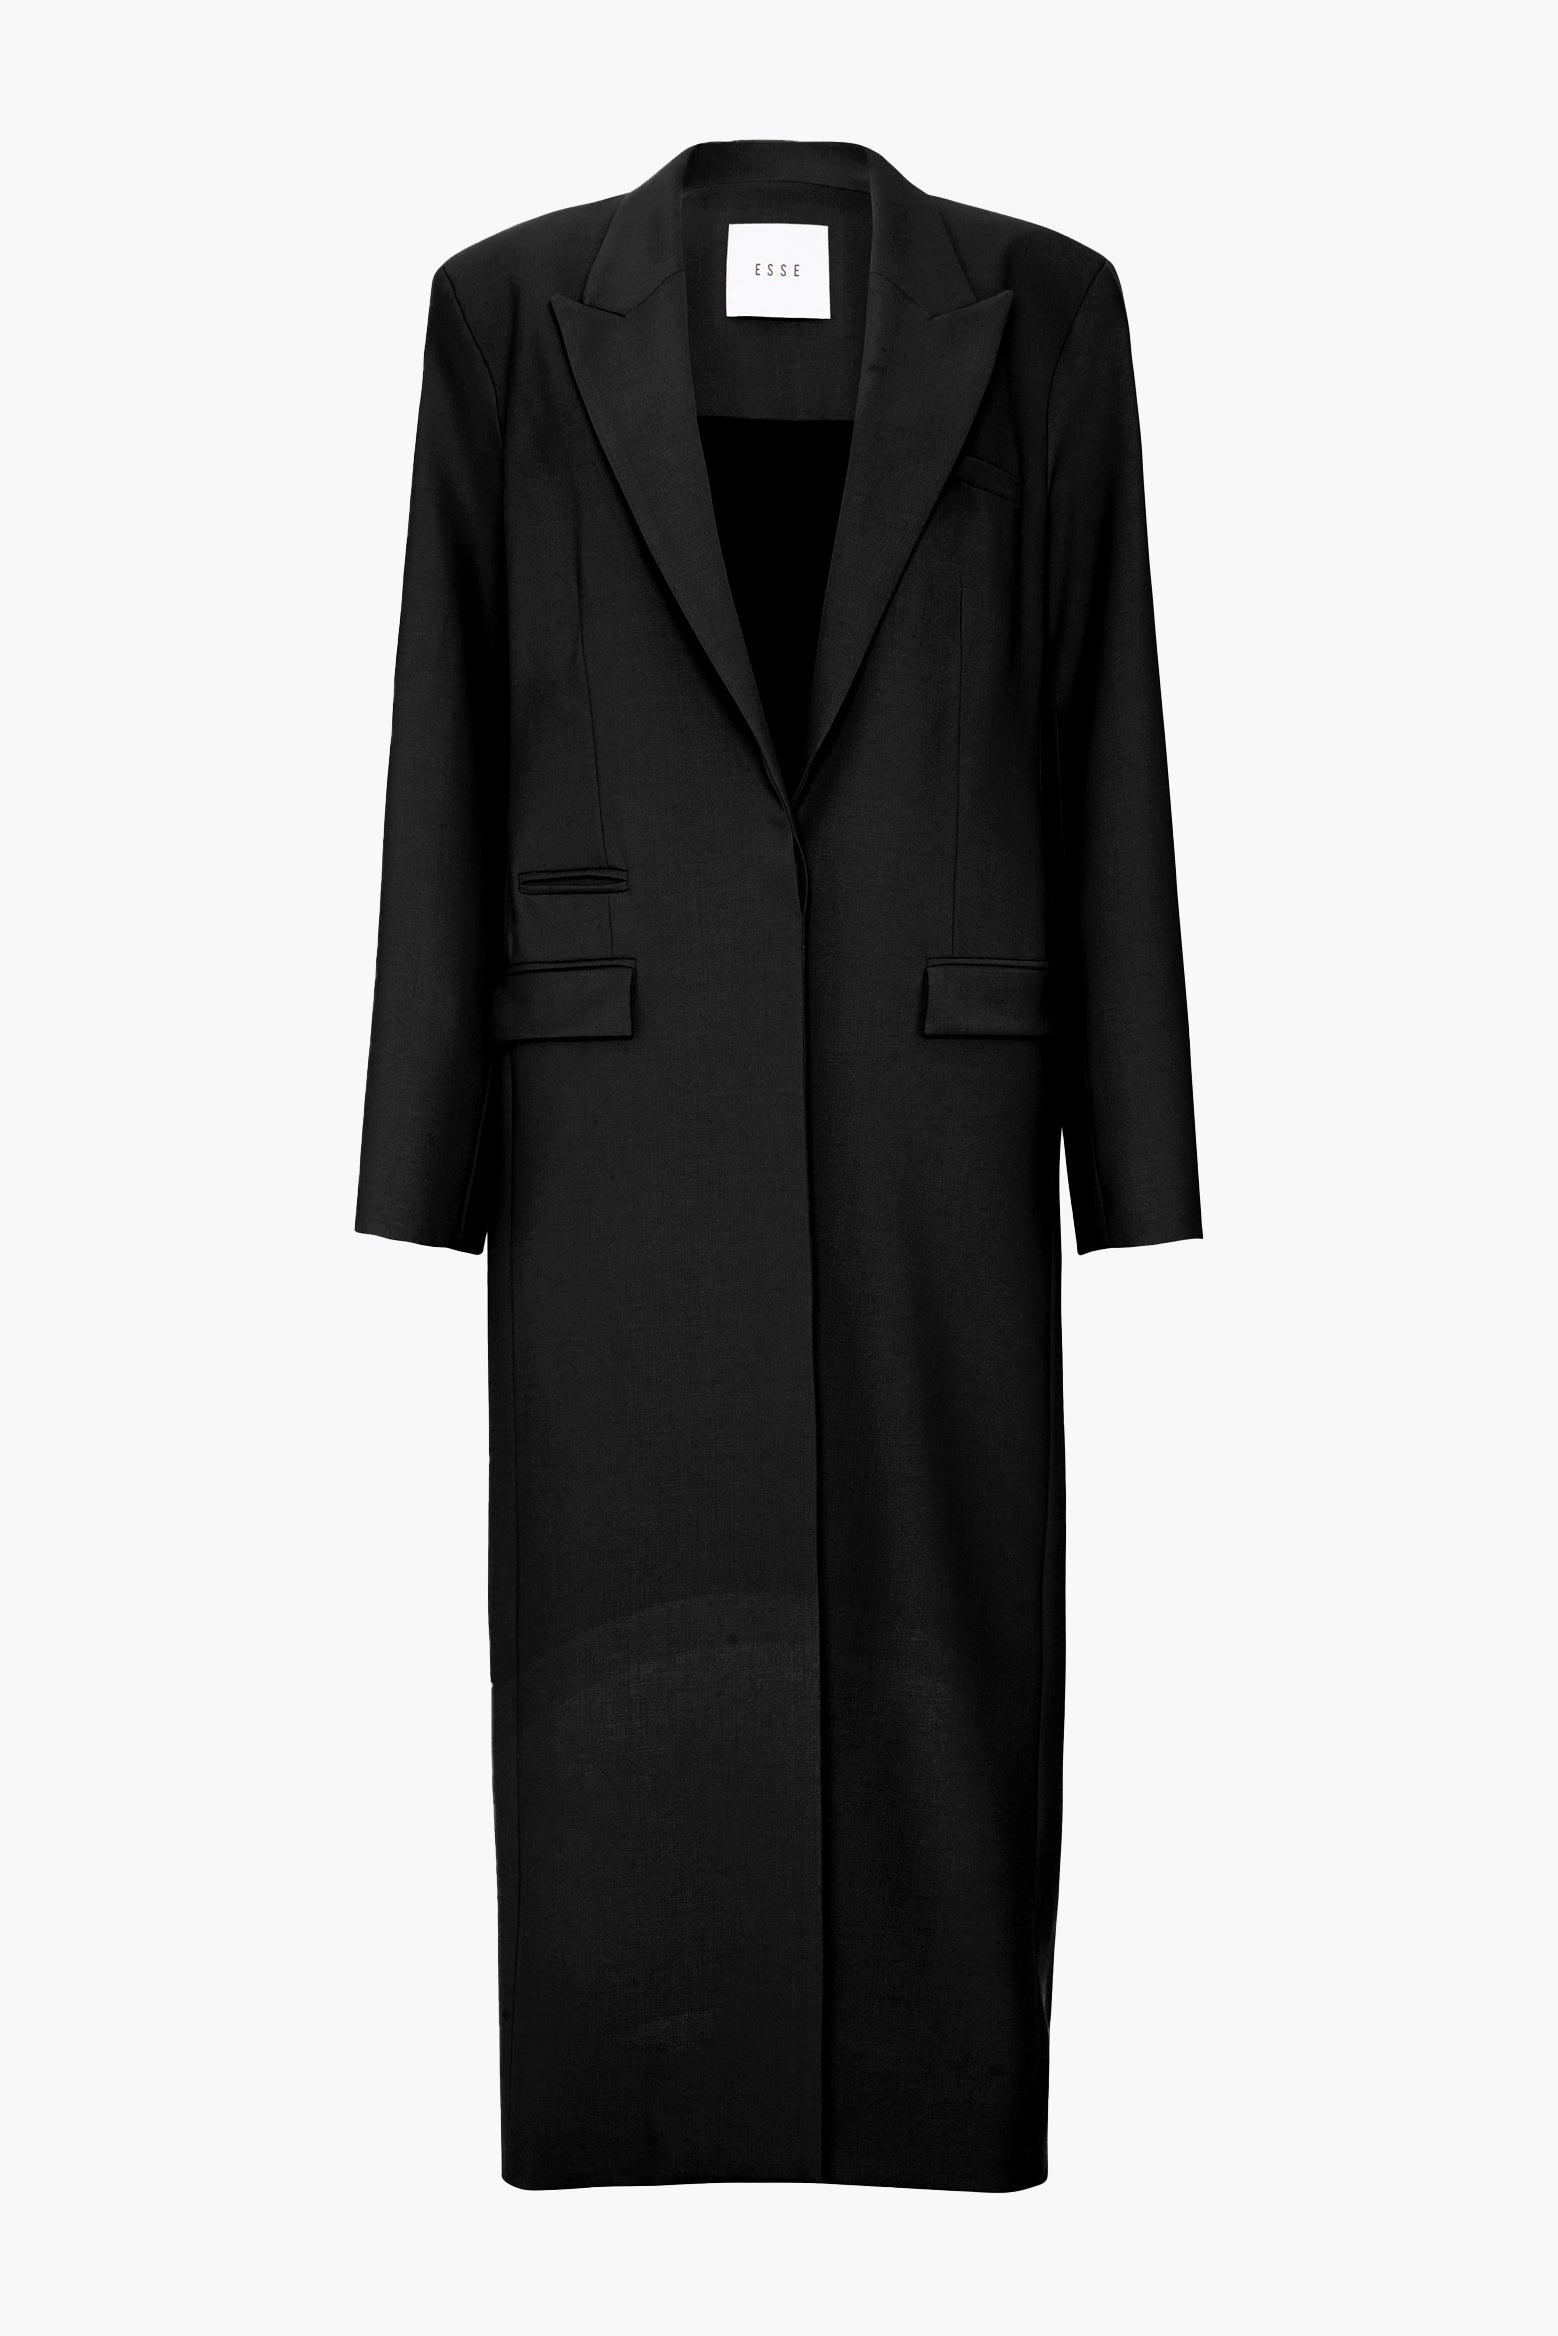 ESSE STUDIOS Classico Extend Blazer in Black available at The New Trend